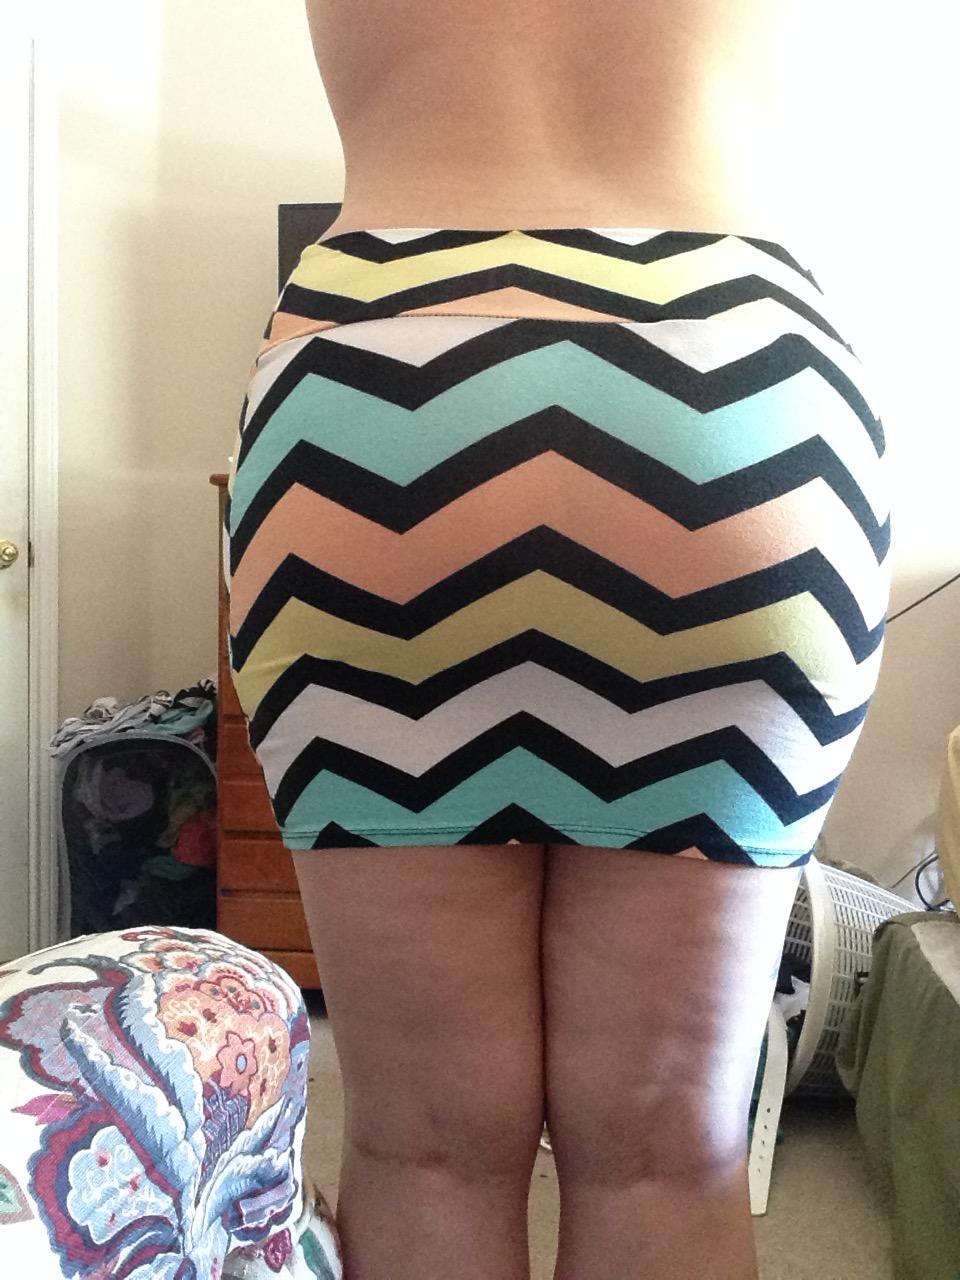 Want to guess what's under this skirt? I'll give you a hint: it's not panties.